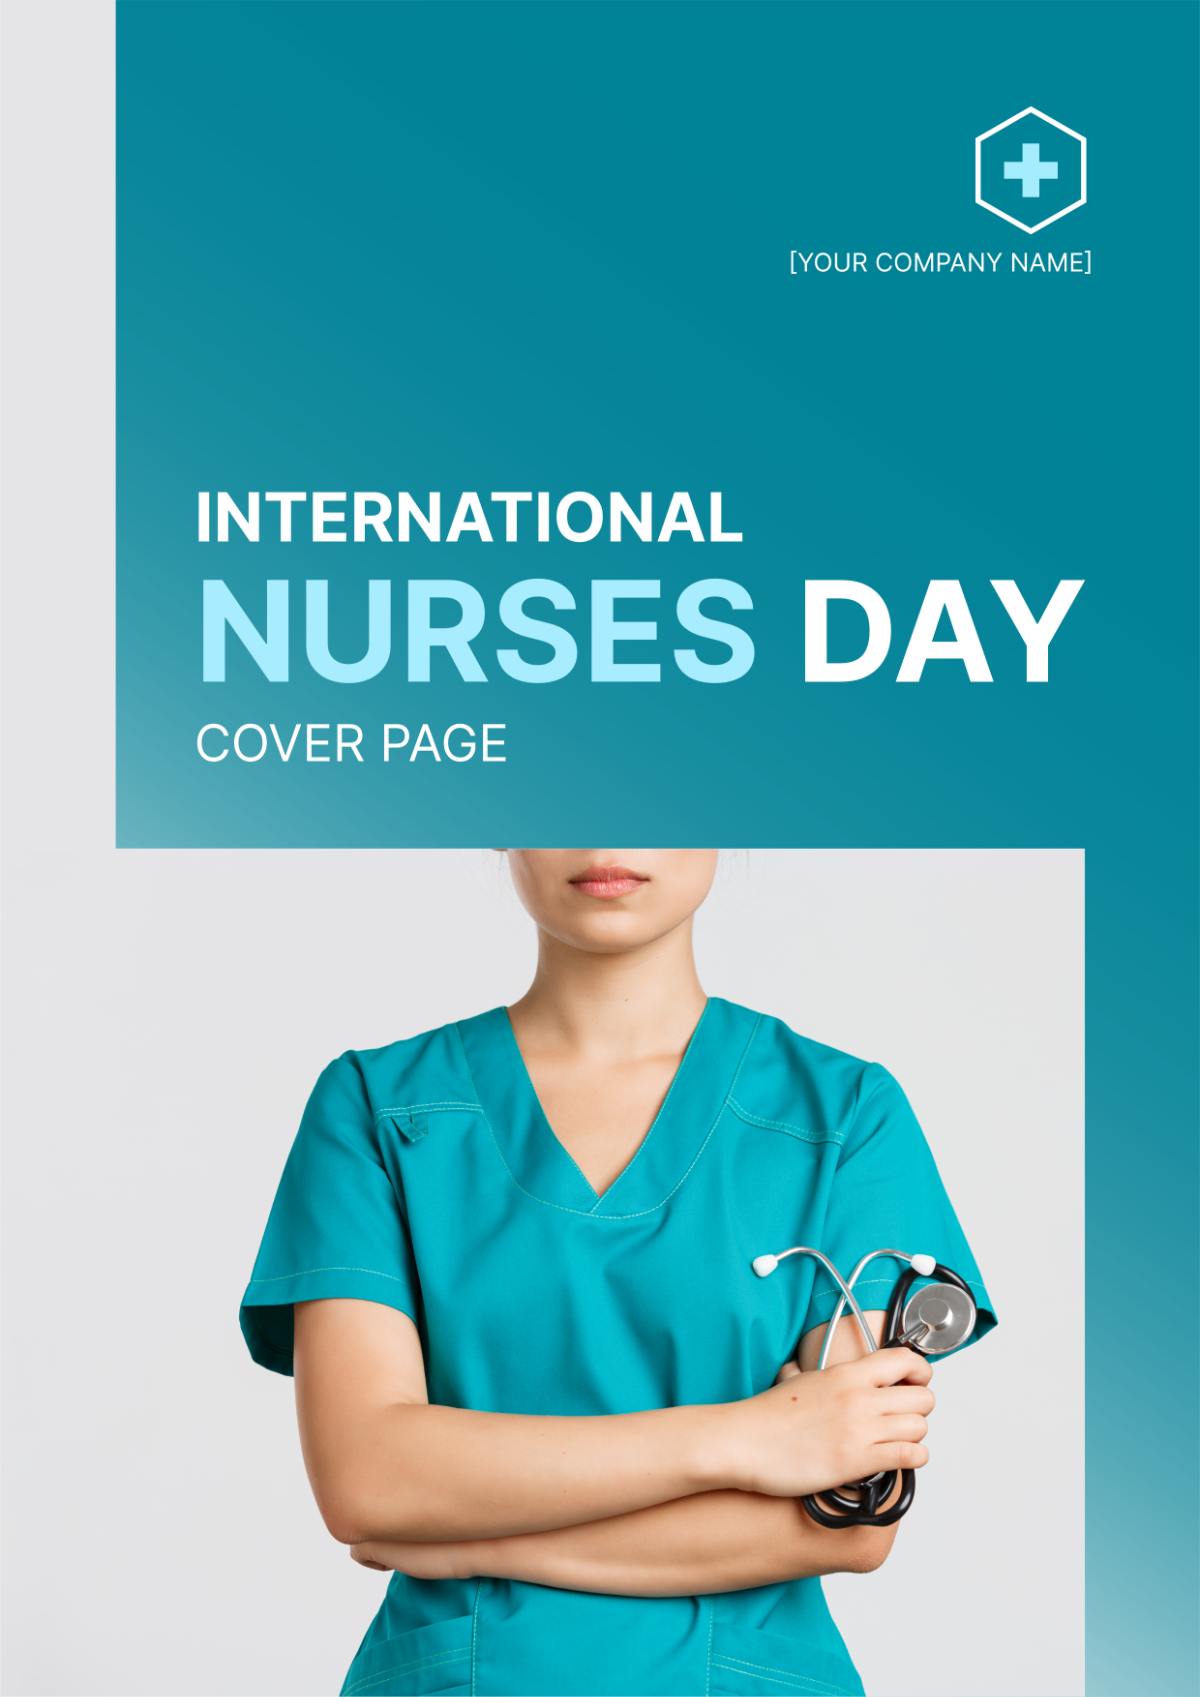 International Nurses Day Cover Page